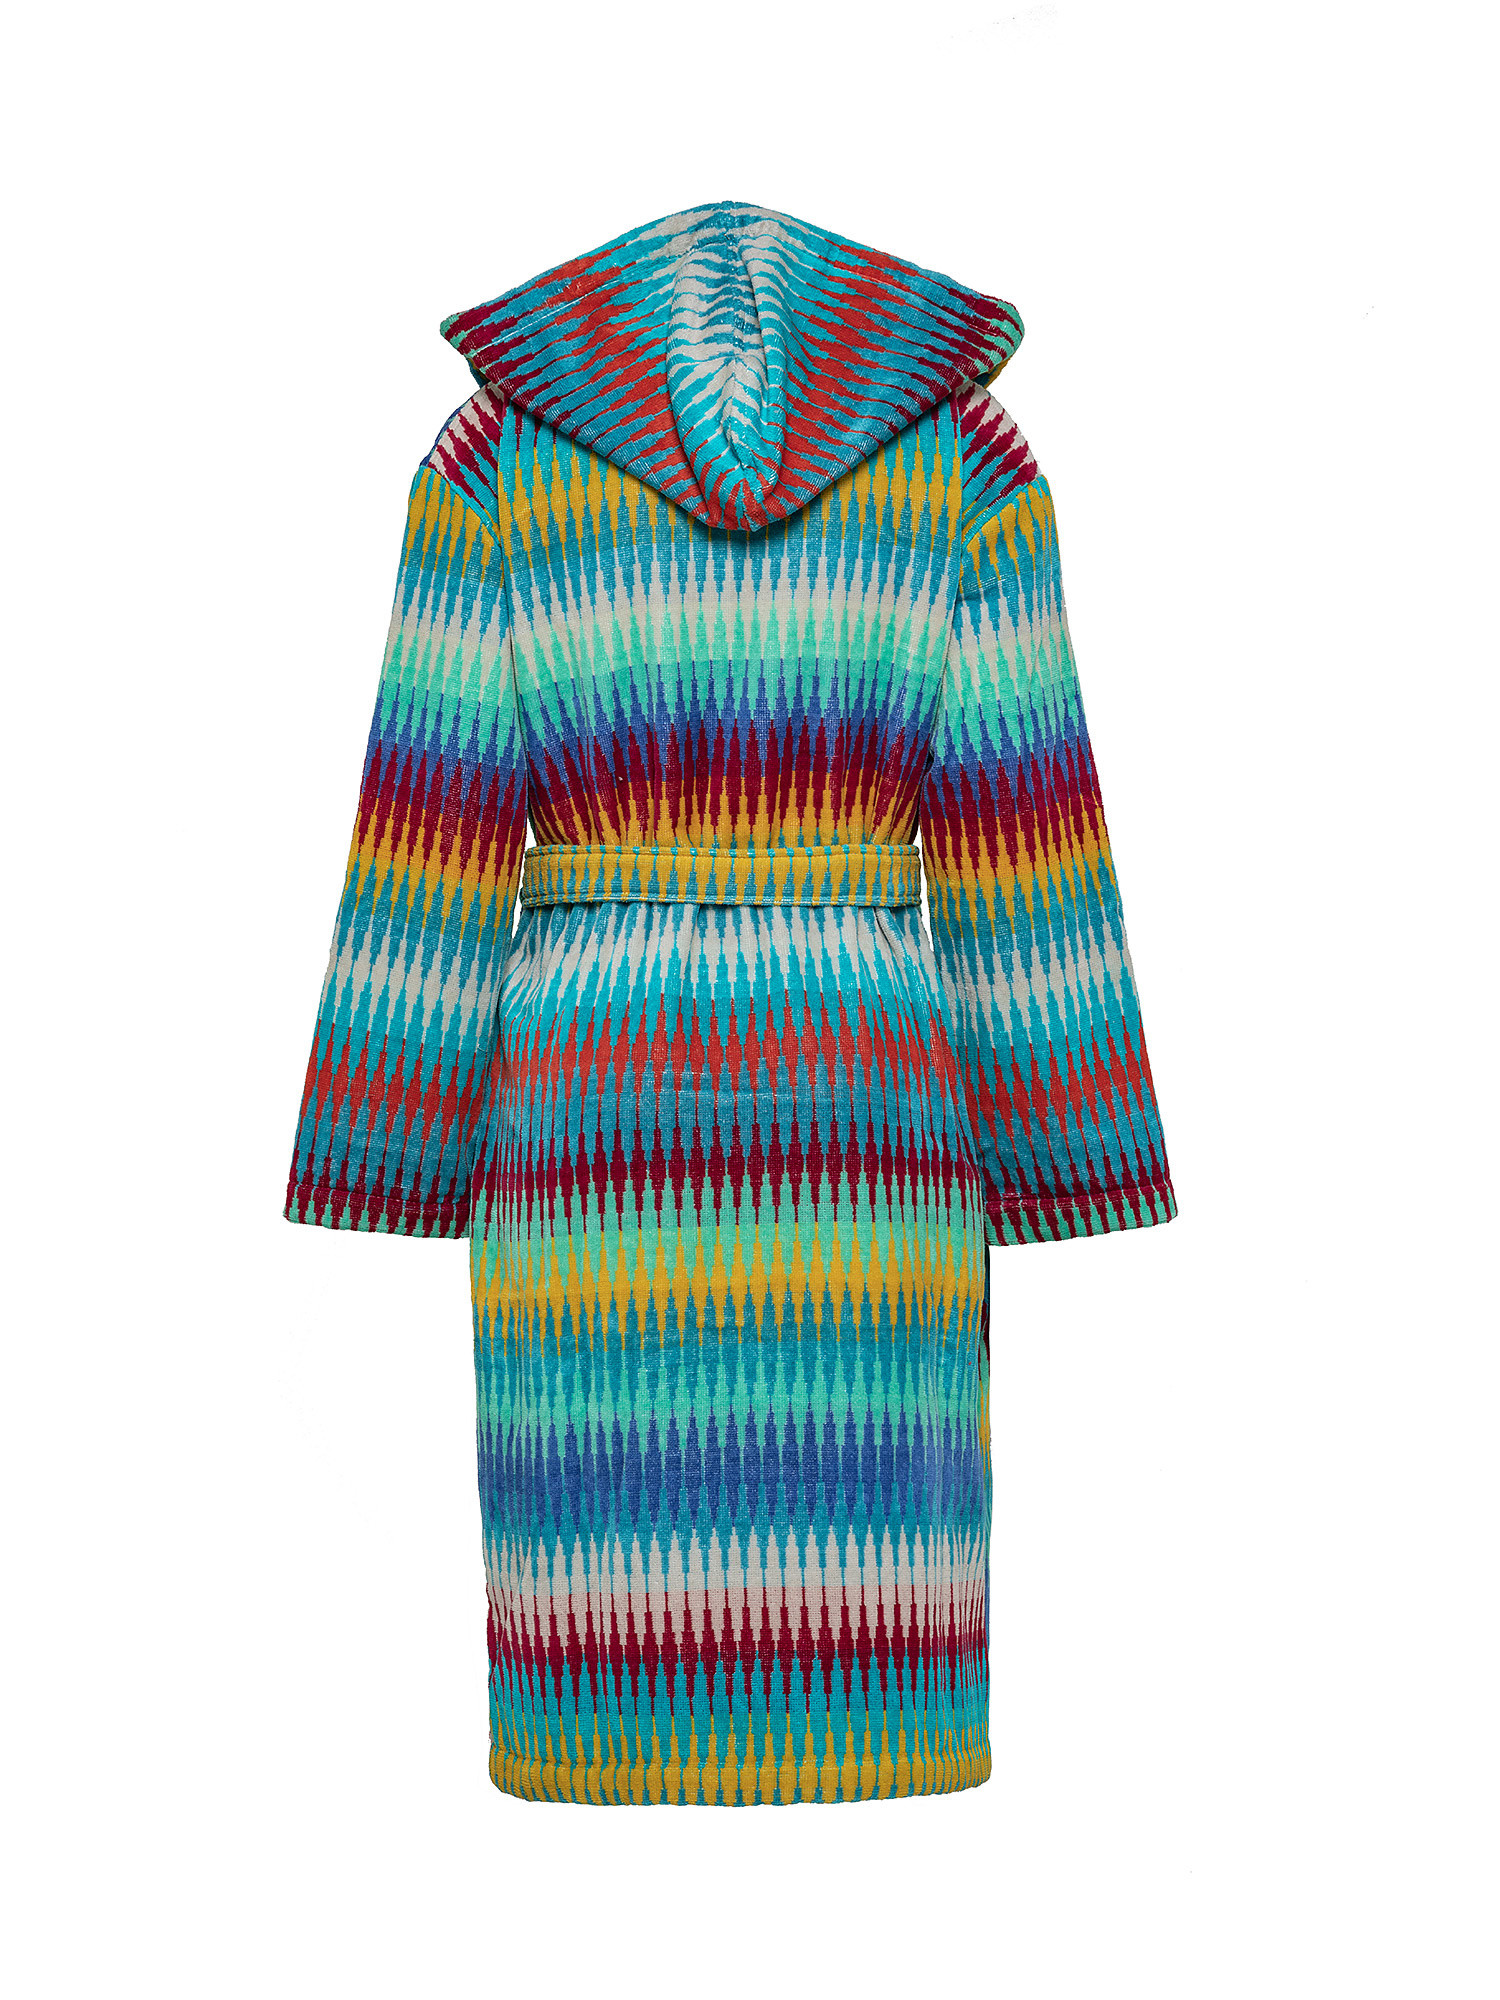 Cotton velor bathrobe with abstract motif, Multicolor, large image number 1